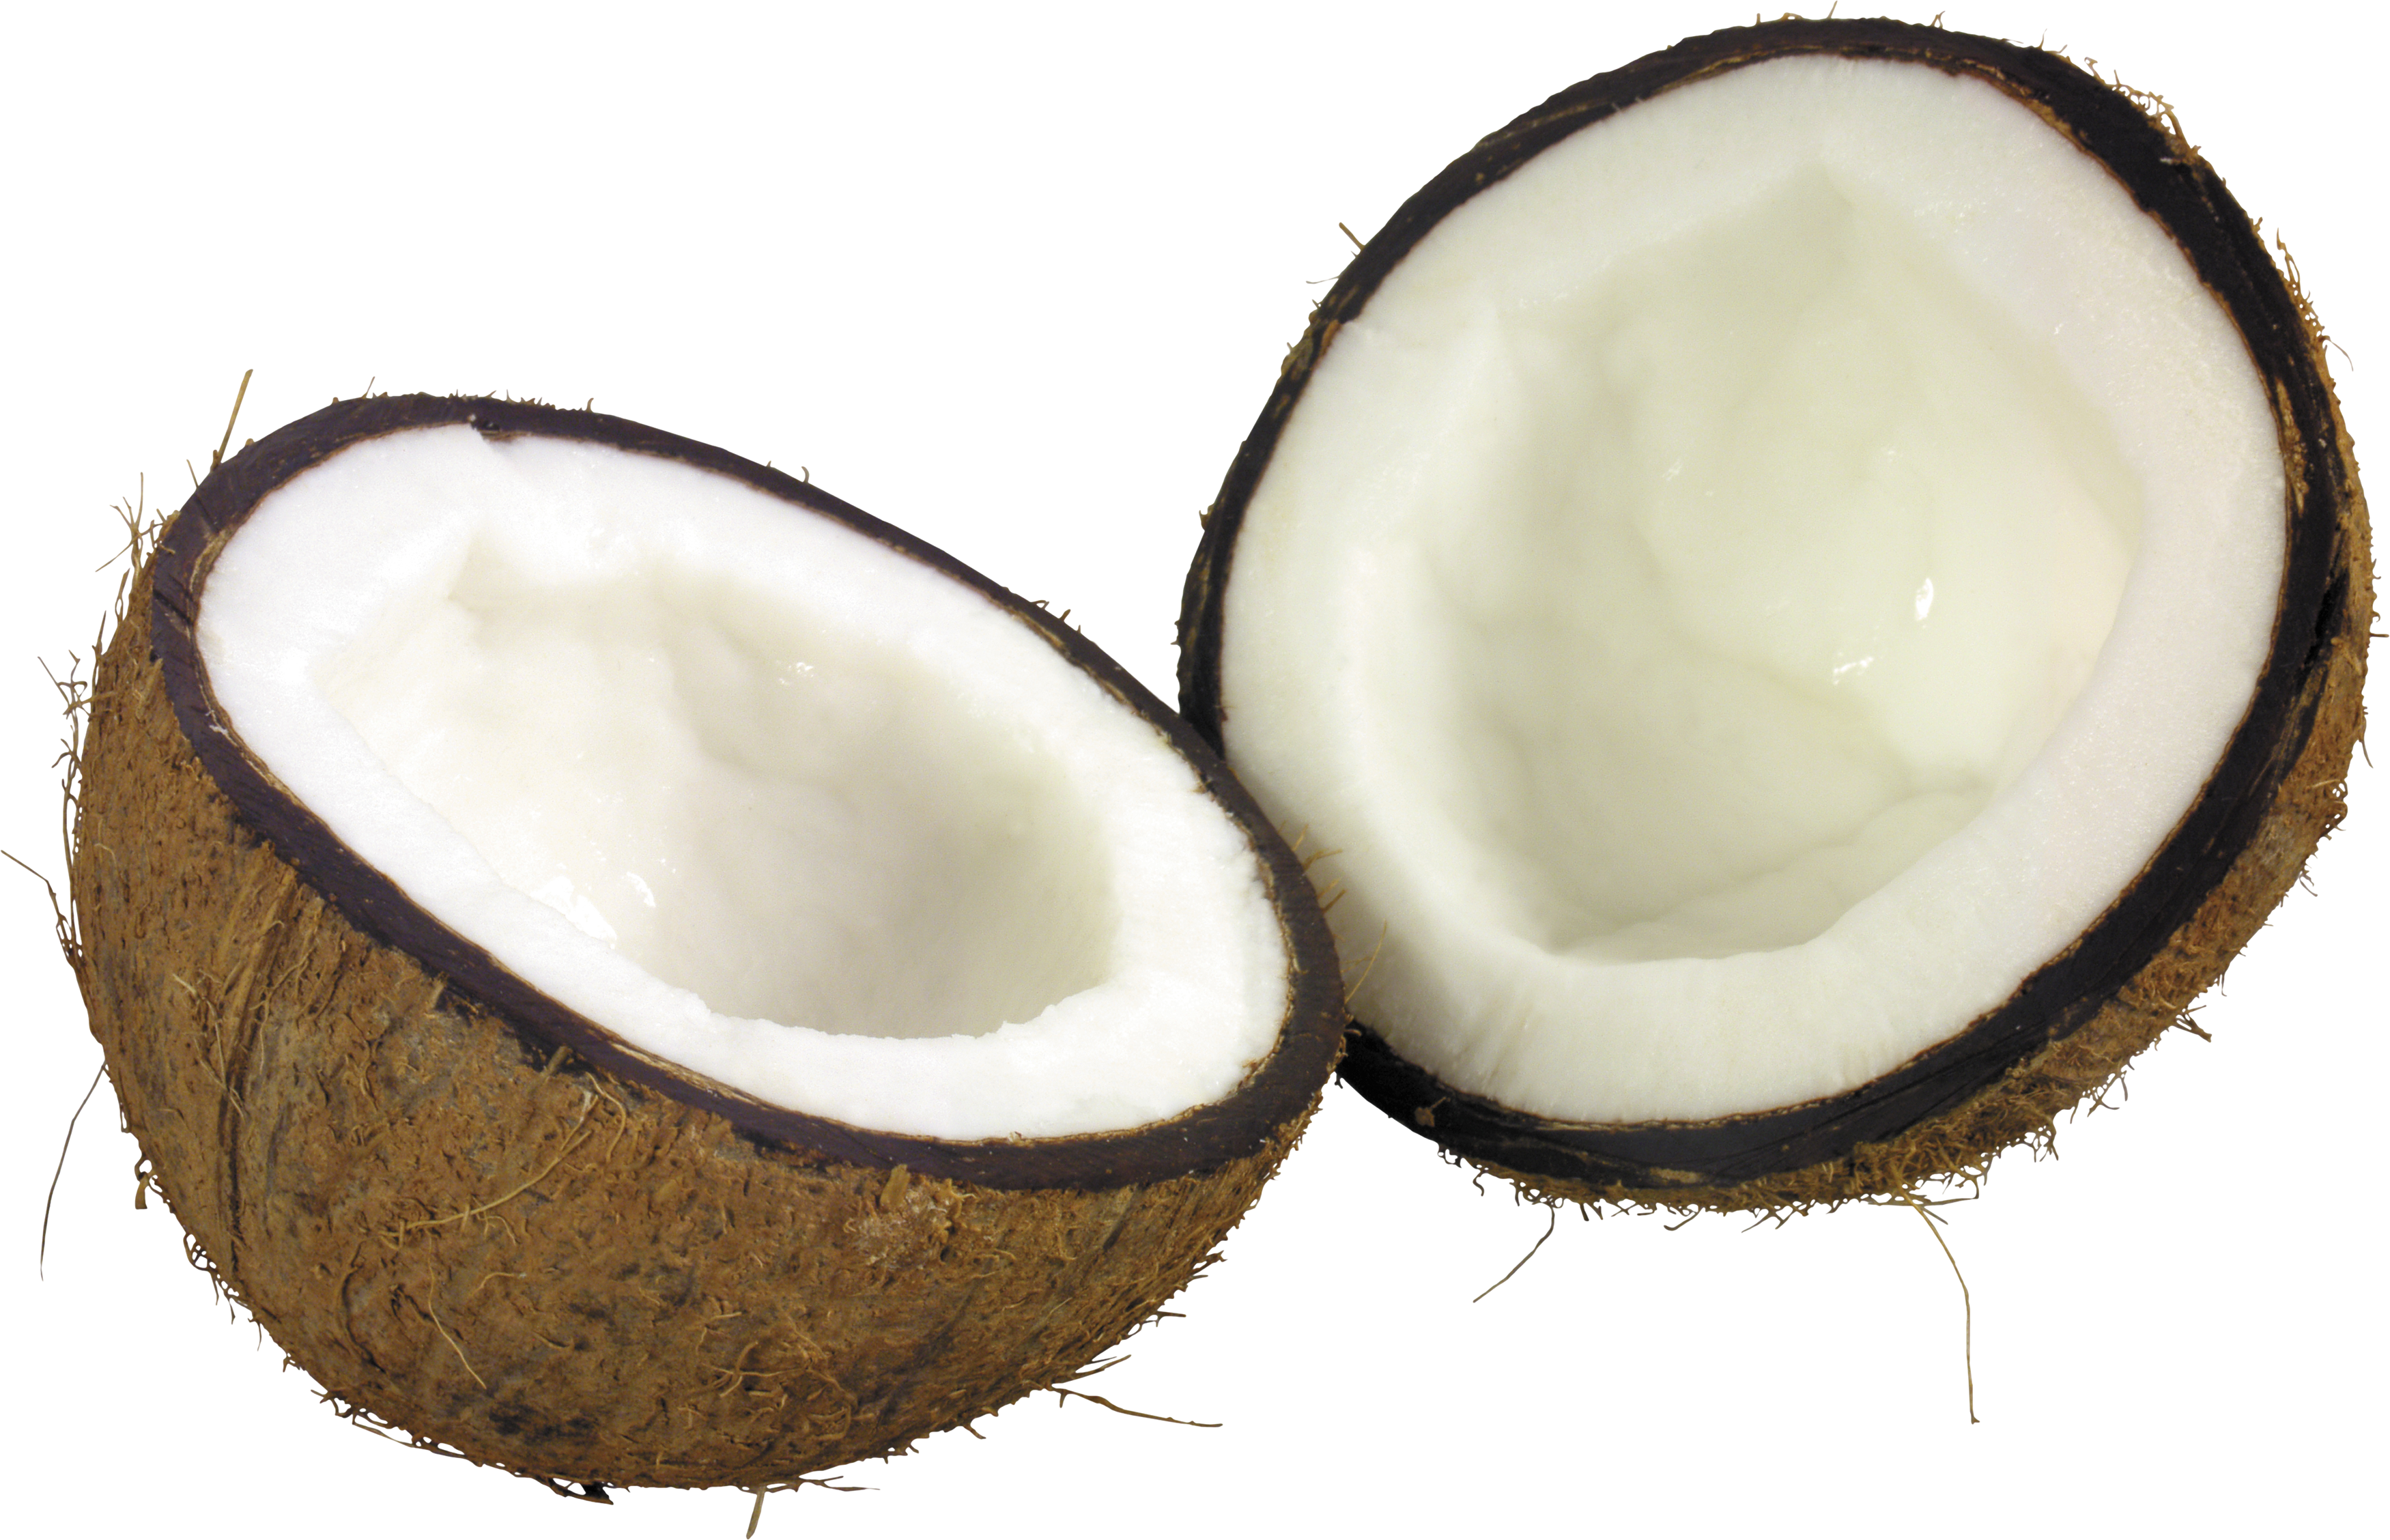 Coconuts PNG image